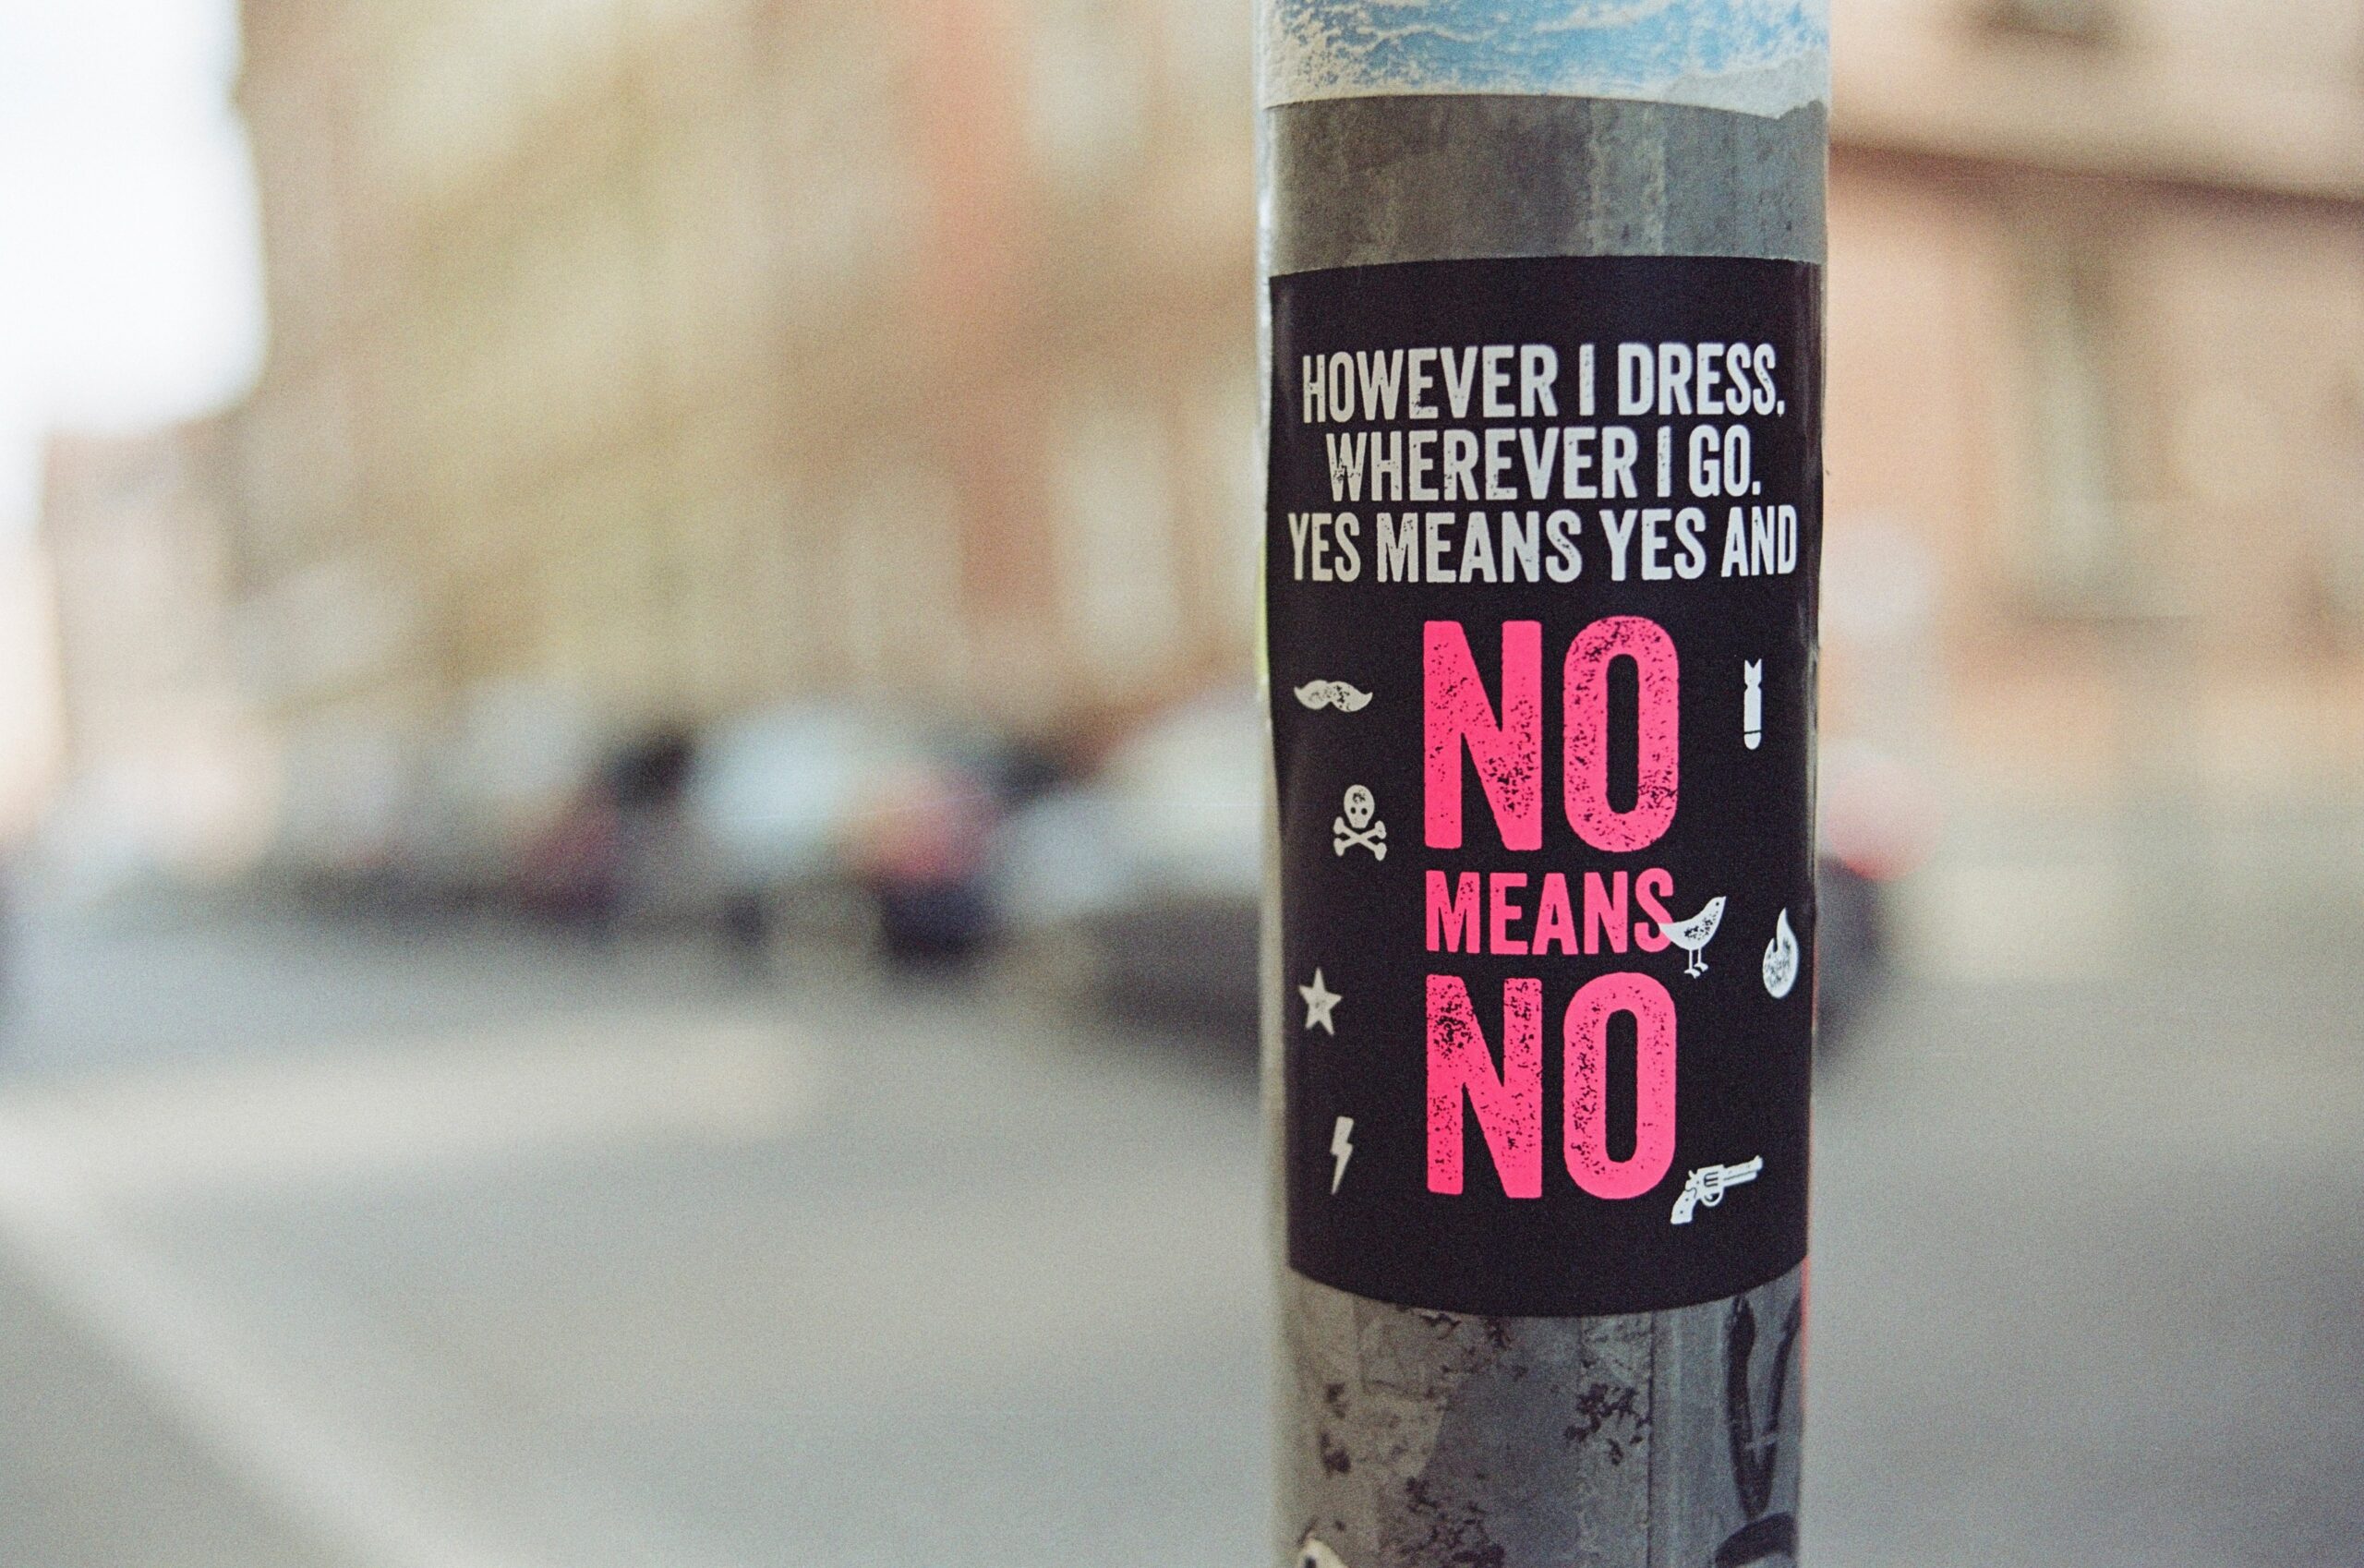 A street poll that says "HOWEVER I DRESS, WHEREVER I GO, YES MEANS YES AND NO MEANS NO"